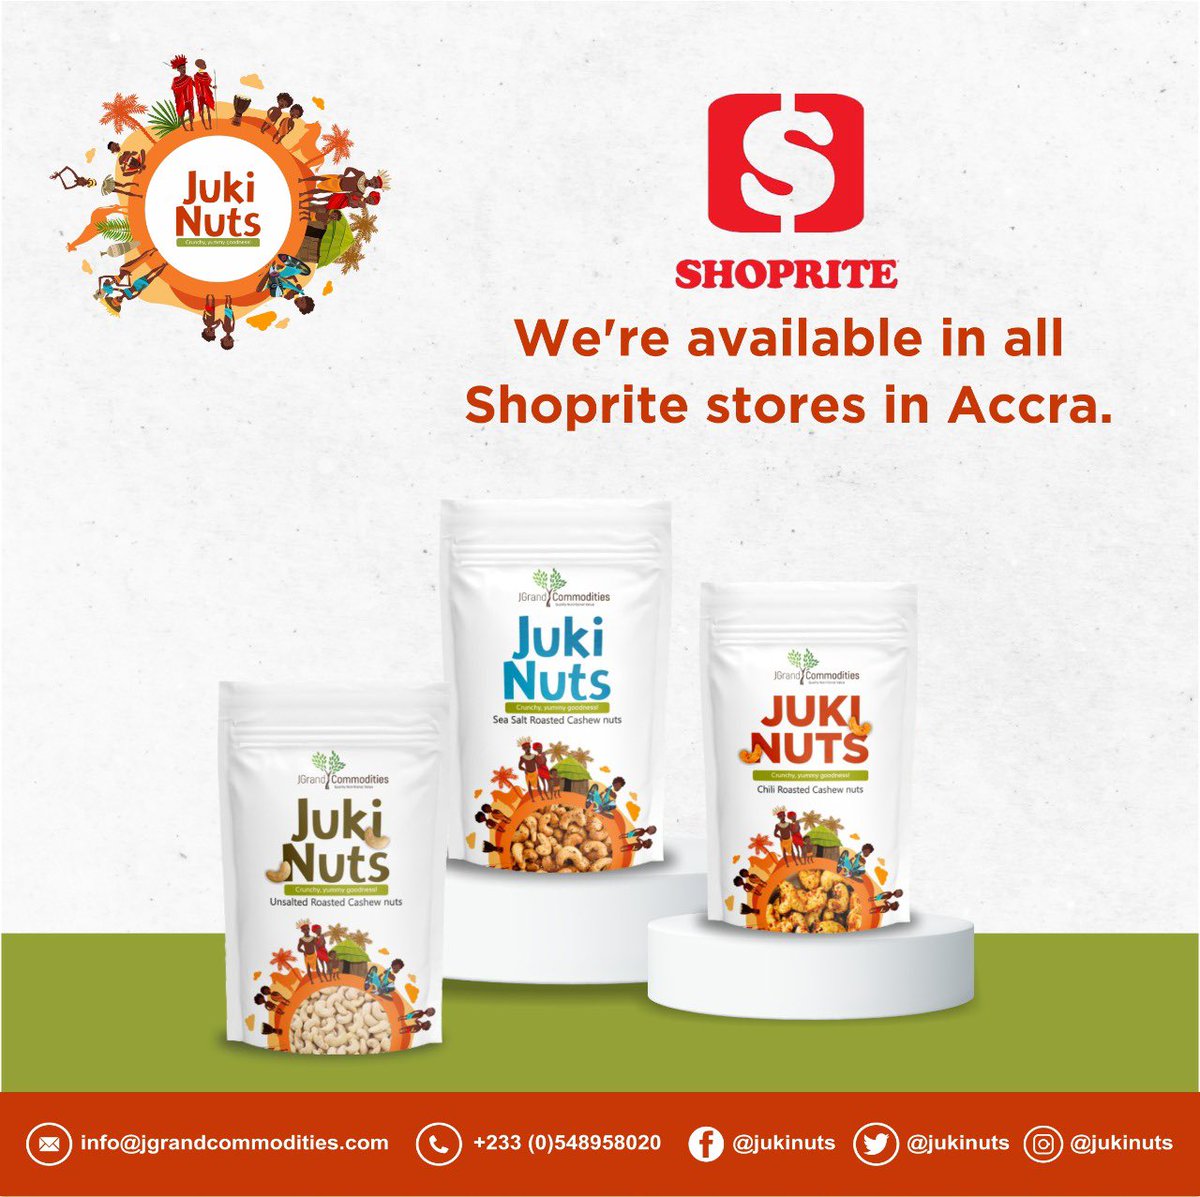 Hello Accra! We're closer to you!

#JukiNuts #Accramall #westhillsmall